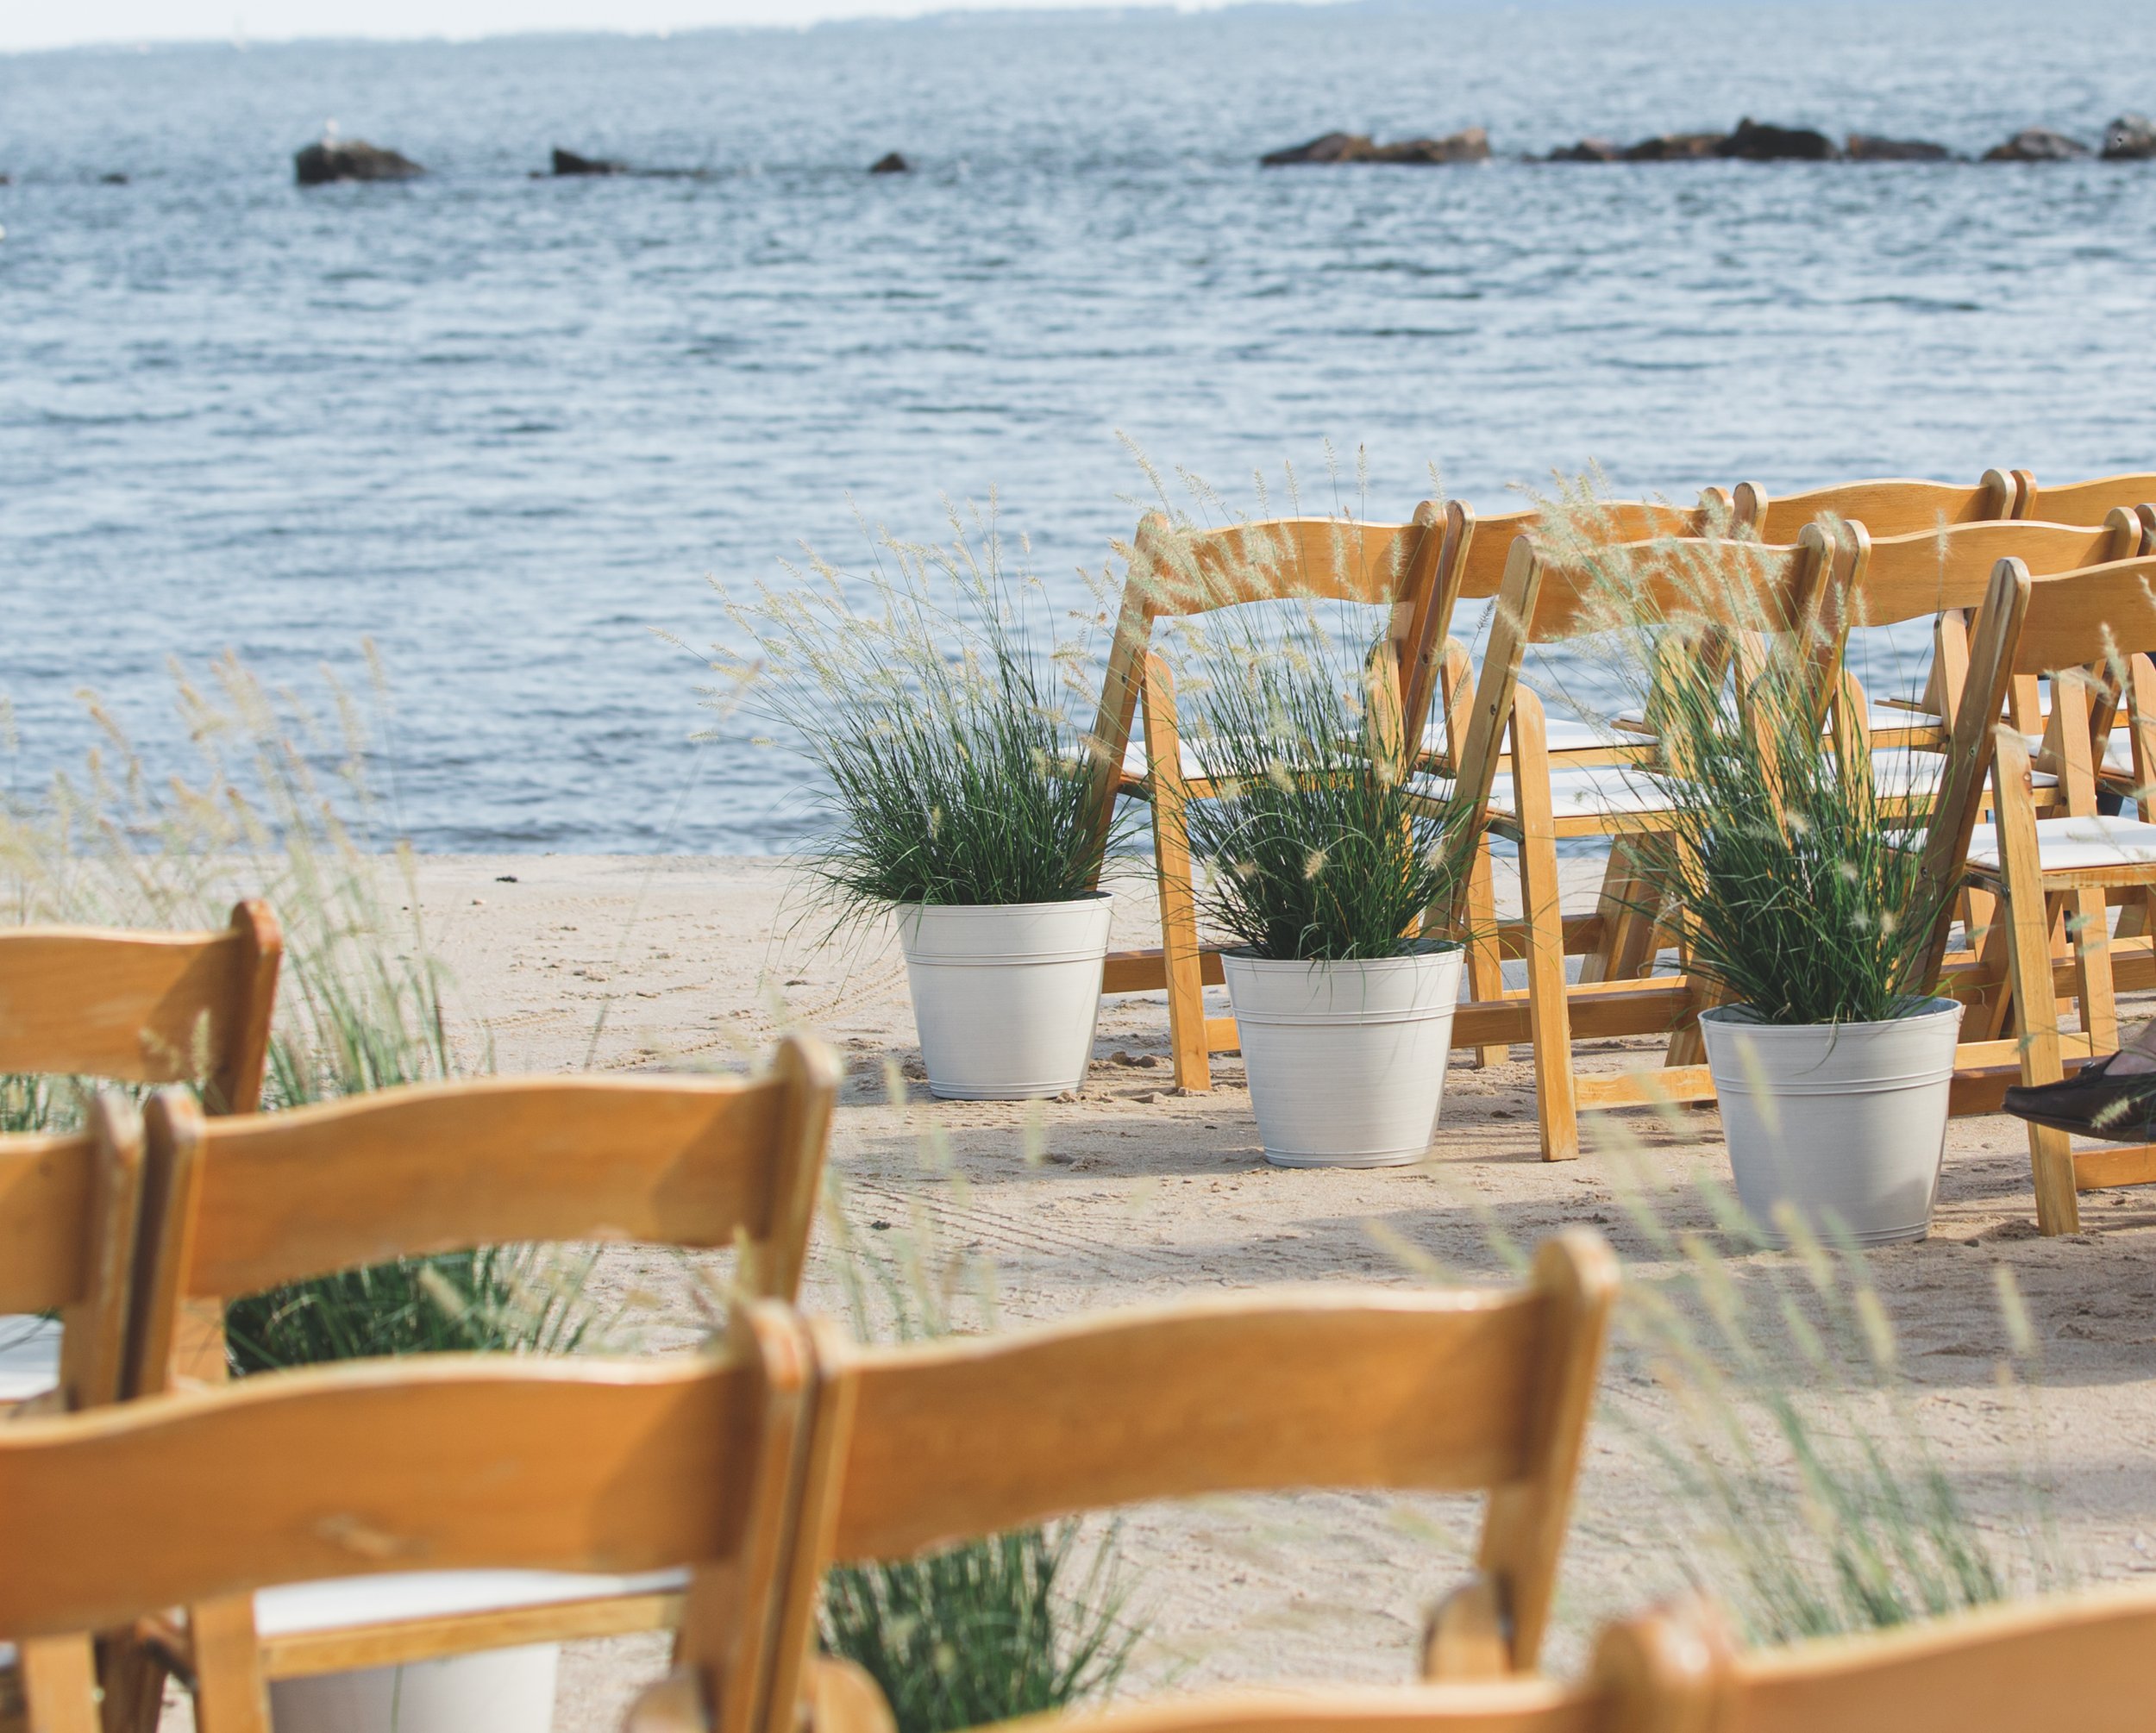 Waterfront Ceremony Site for Summer Wedding in Connecticut